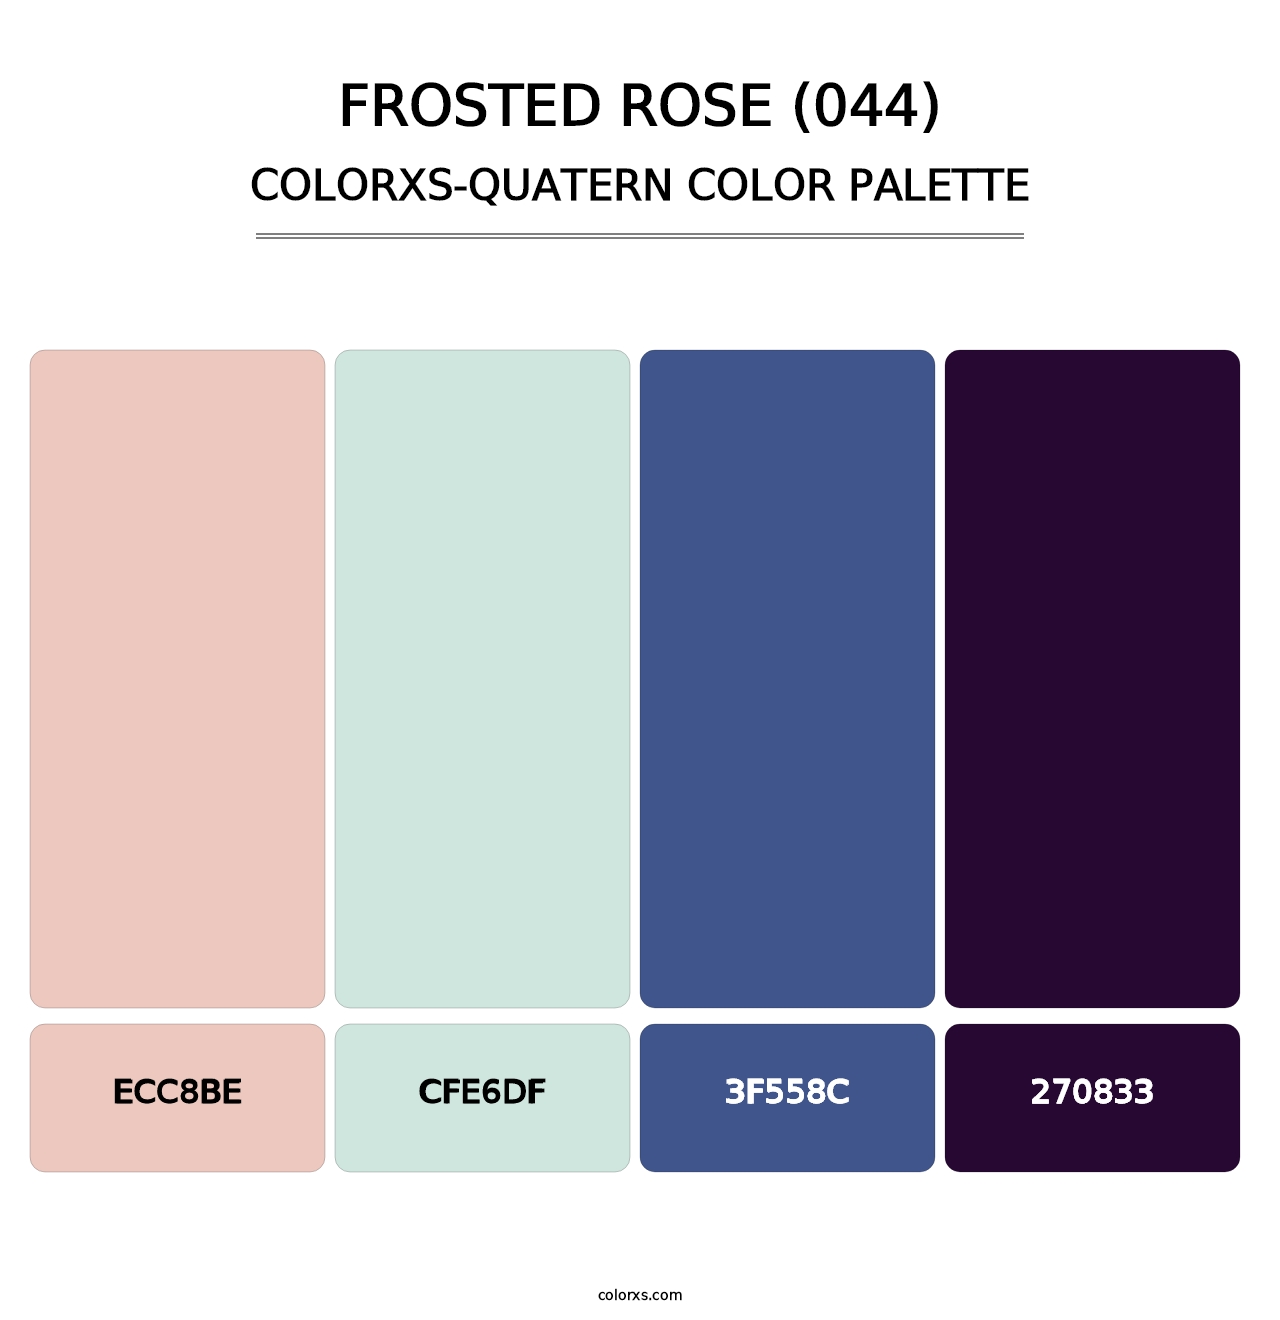 Frosted Rose (044) - Colorxs Quatern Palette